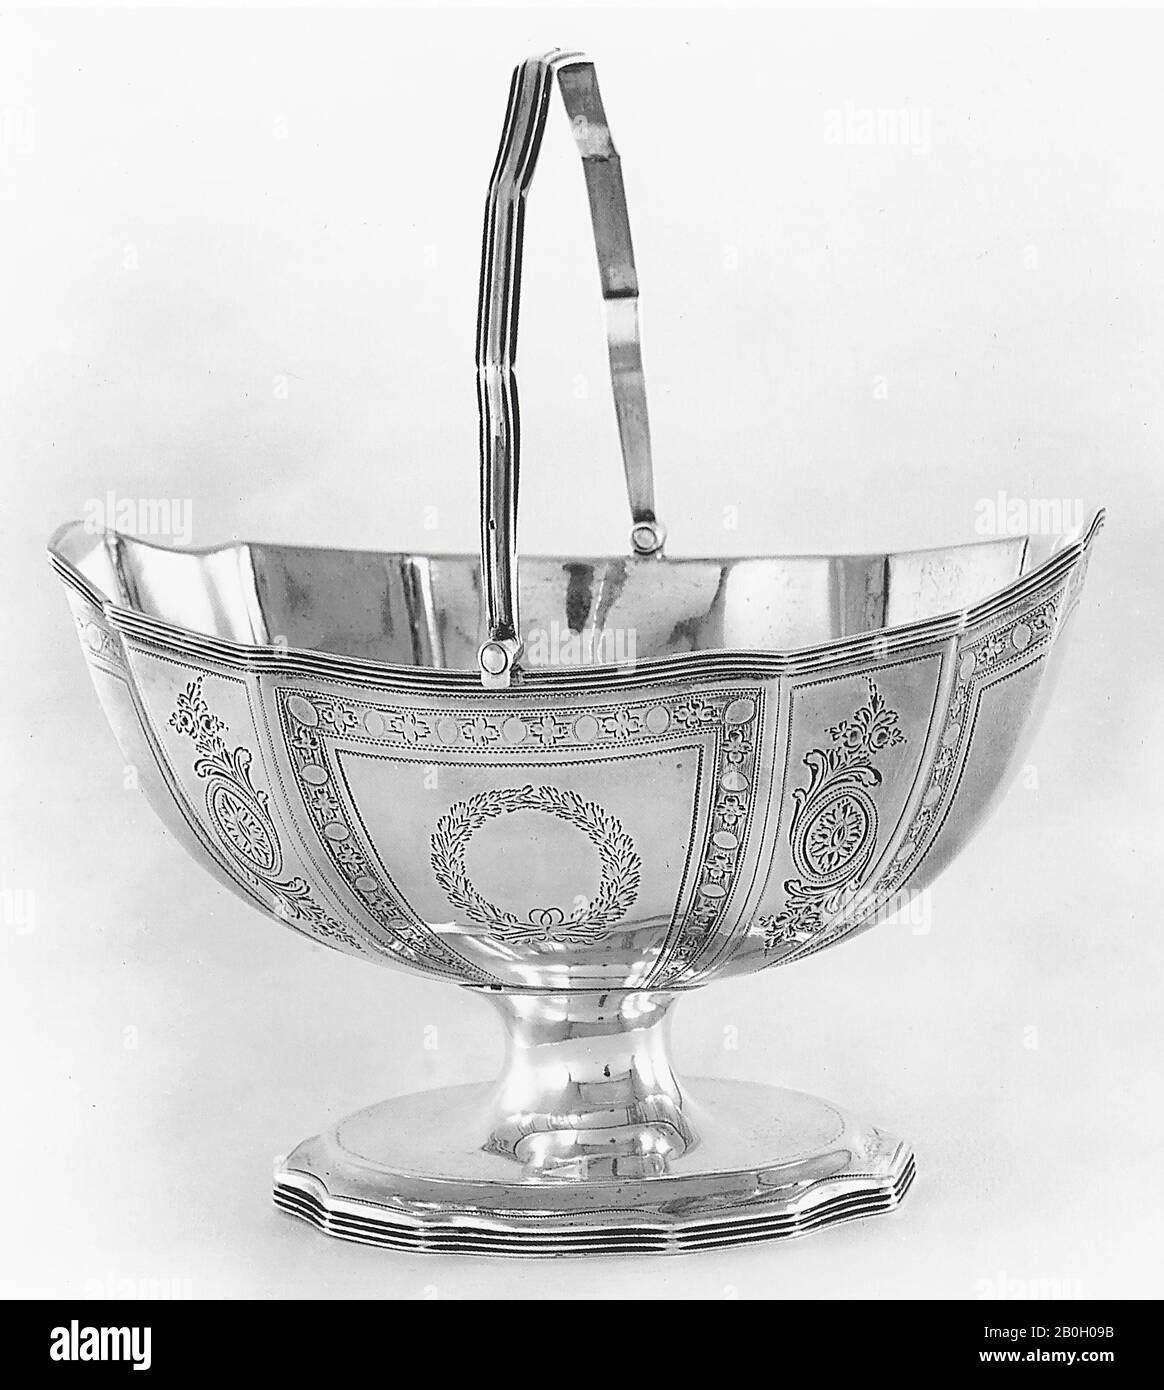 Robert Hennell I and David Hennell II, English, working in partnership 1795–1802, Sugar Basket, 1795/96, Silver, 7 x 6 3/16 x 4 5/8 in. (17.8 x 15.7 x 11.7 cm Stock Photo